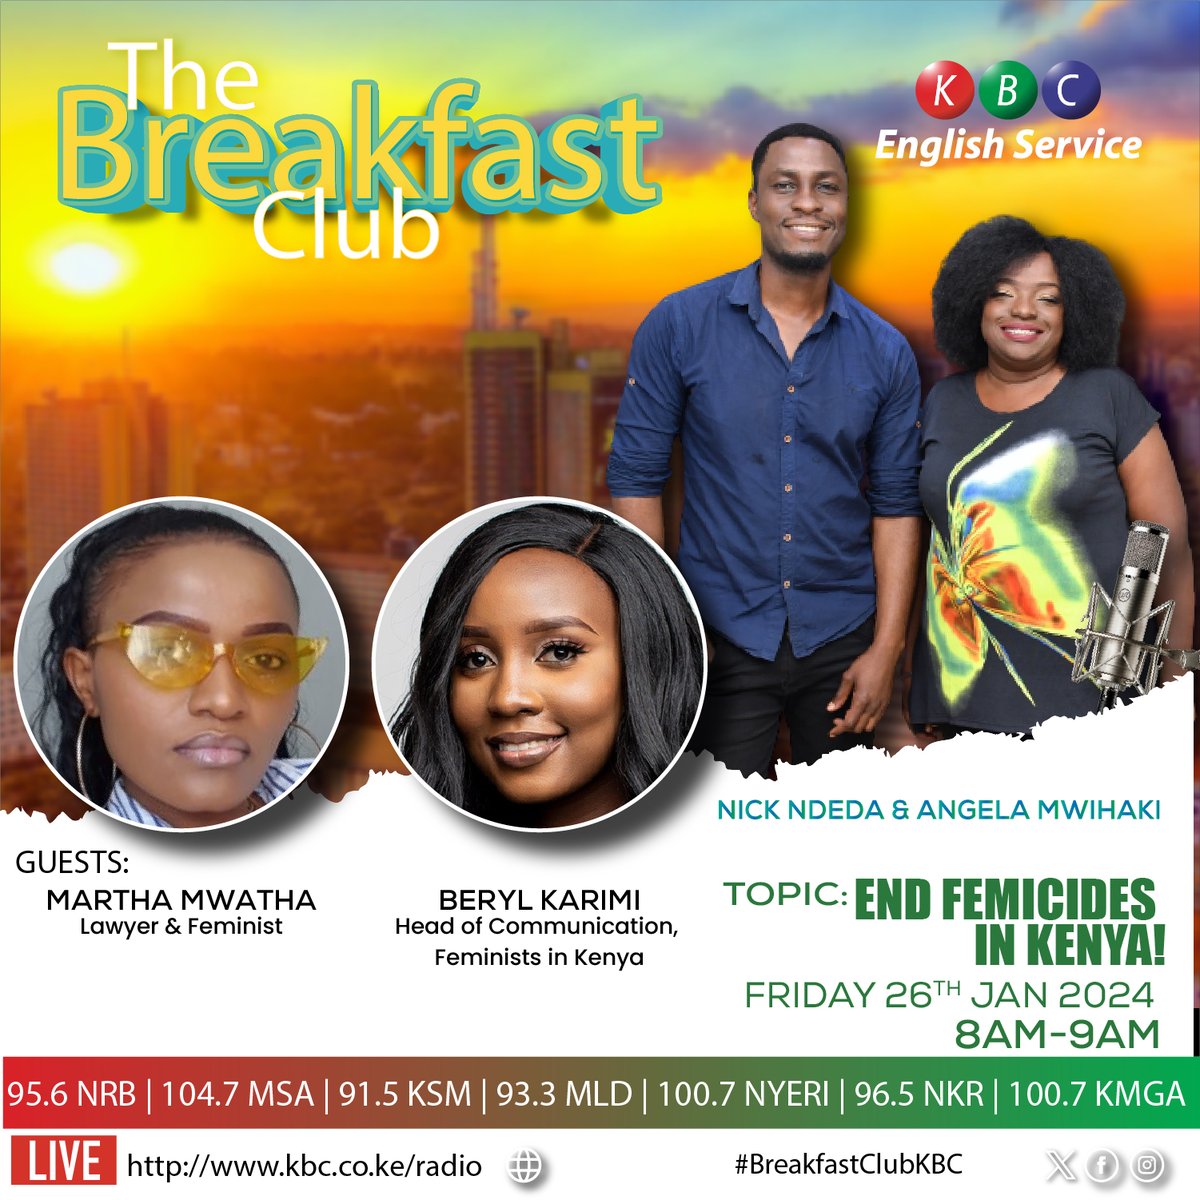 It's Friday! 🥳🤩 and it's official! Let's get the weekend started. Come have some Breakfast with Nick Ndeda & Angela Mwihaki from 0500HRS to 1000HRS. Where are you at? Listen live: kbc.co.ke/radio/ ^PMN #BreakfastClubKBC @NickNdeda | @angelamwihaki